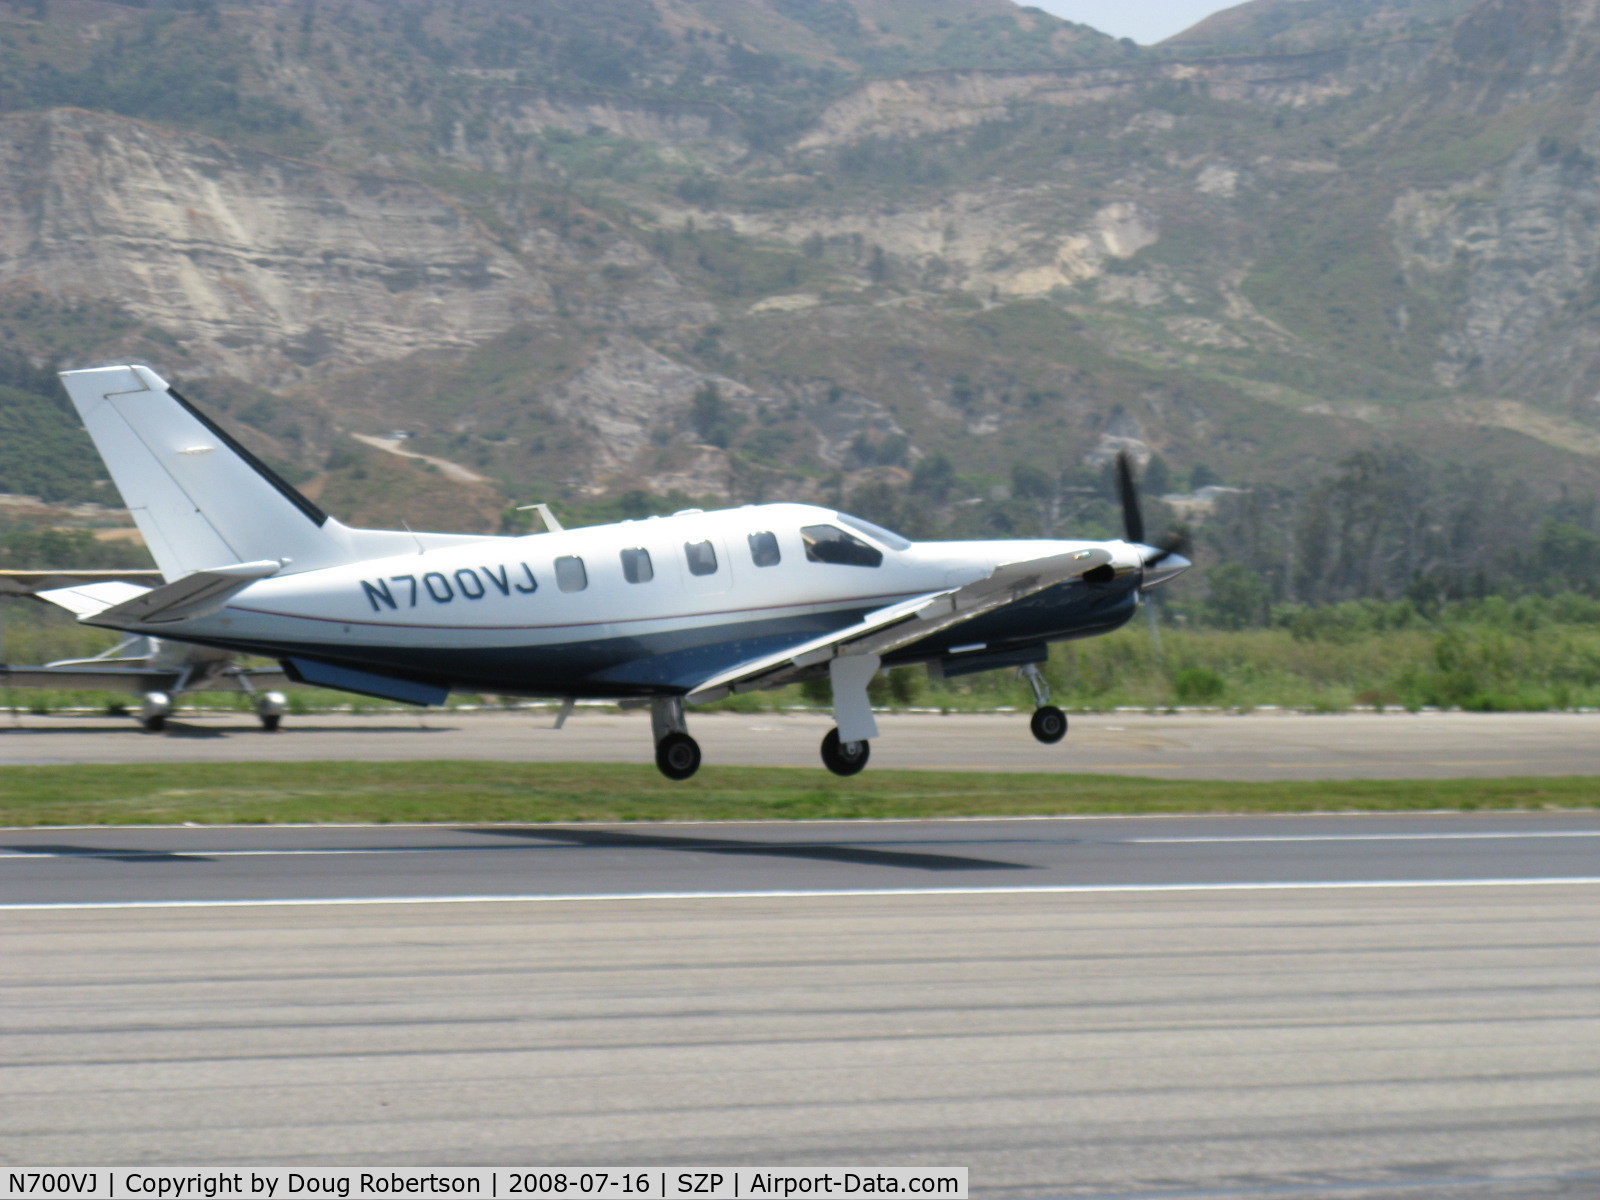 N700VJ, 2000 Socata TBM-700 C/N 163, 2000 EADS SOCATA TBM 700, one P&W (C) PT6A-64 turboprop flat rated at 700 shp, pressurized, max cruise-300 kts 346 mph, takeoff Rwy 22